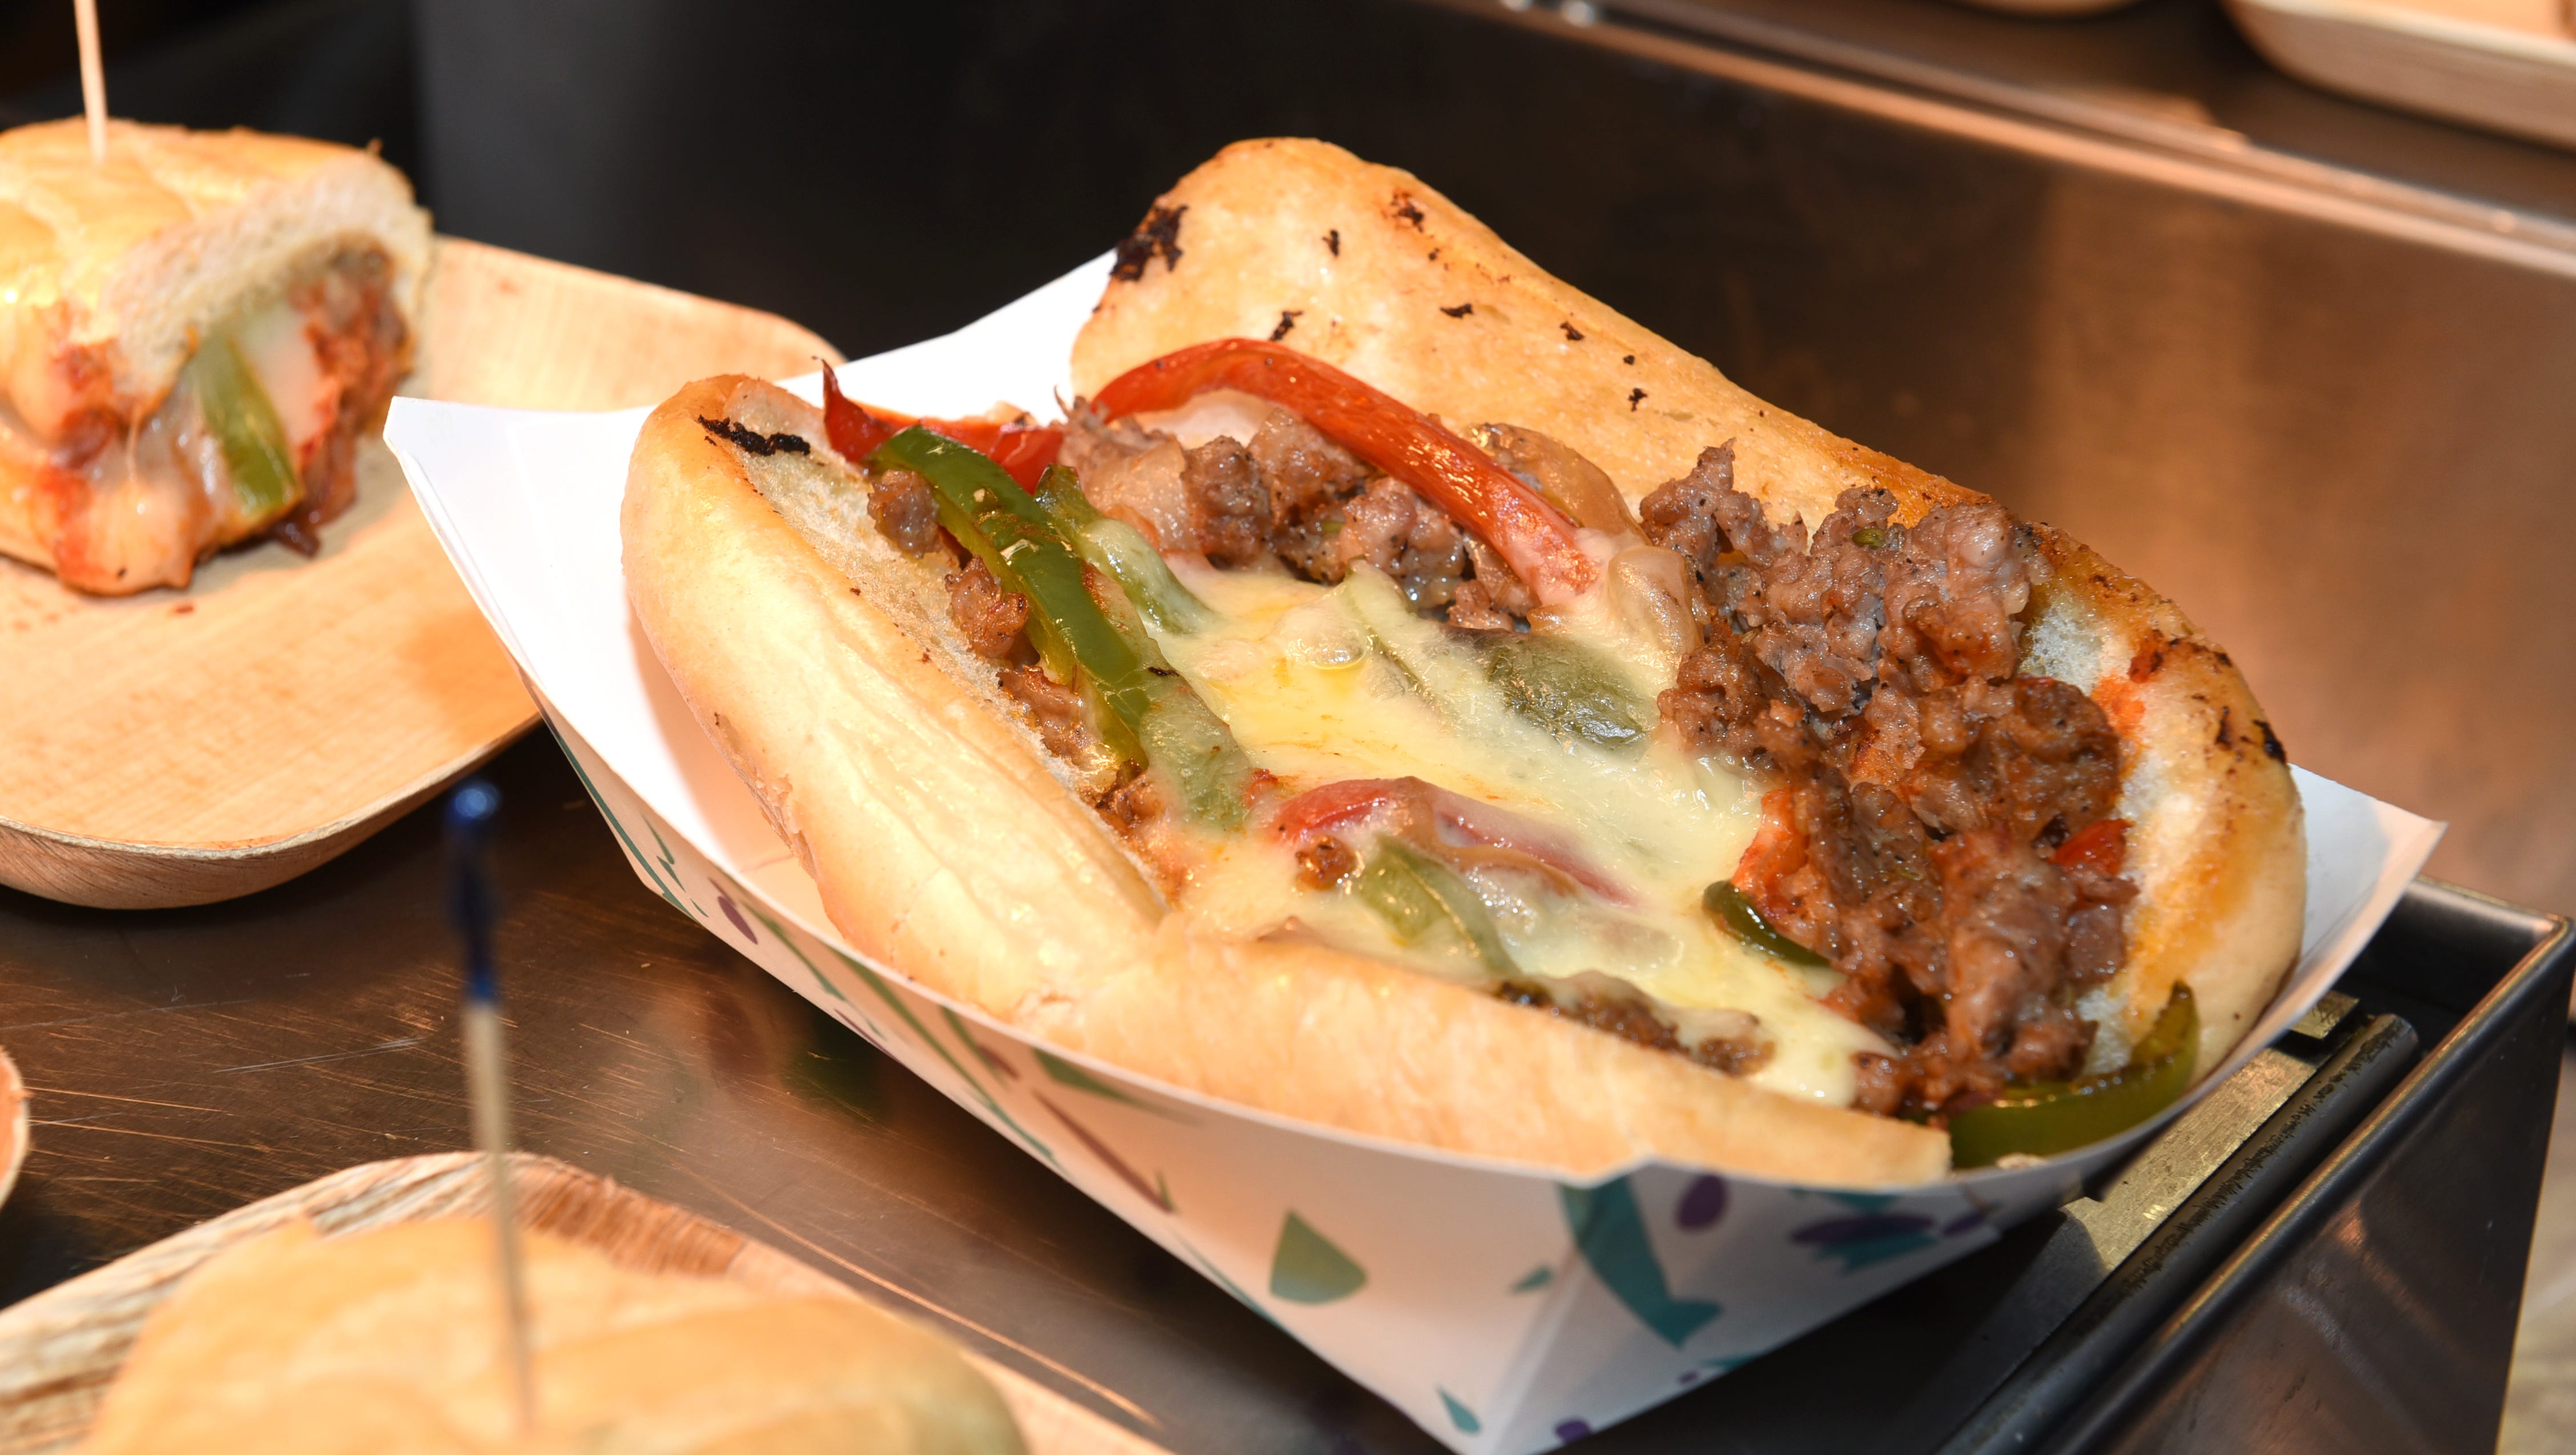 The Italian Grinder during a media event unveiling concessions at Comerica Park on Friday March 23, 2018